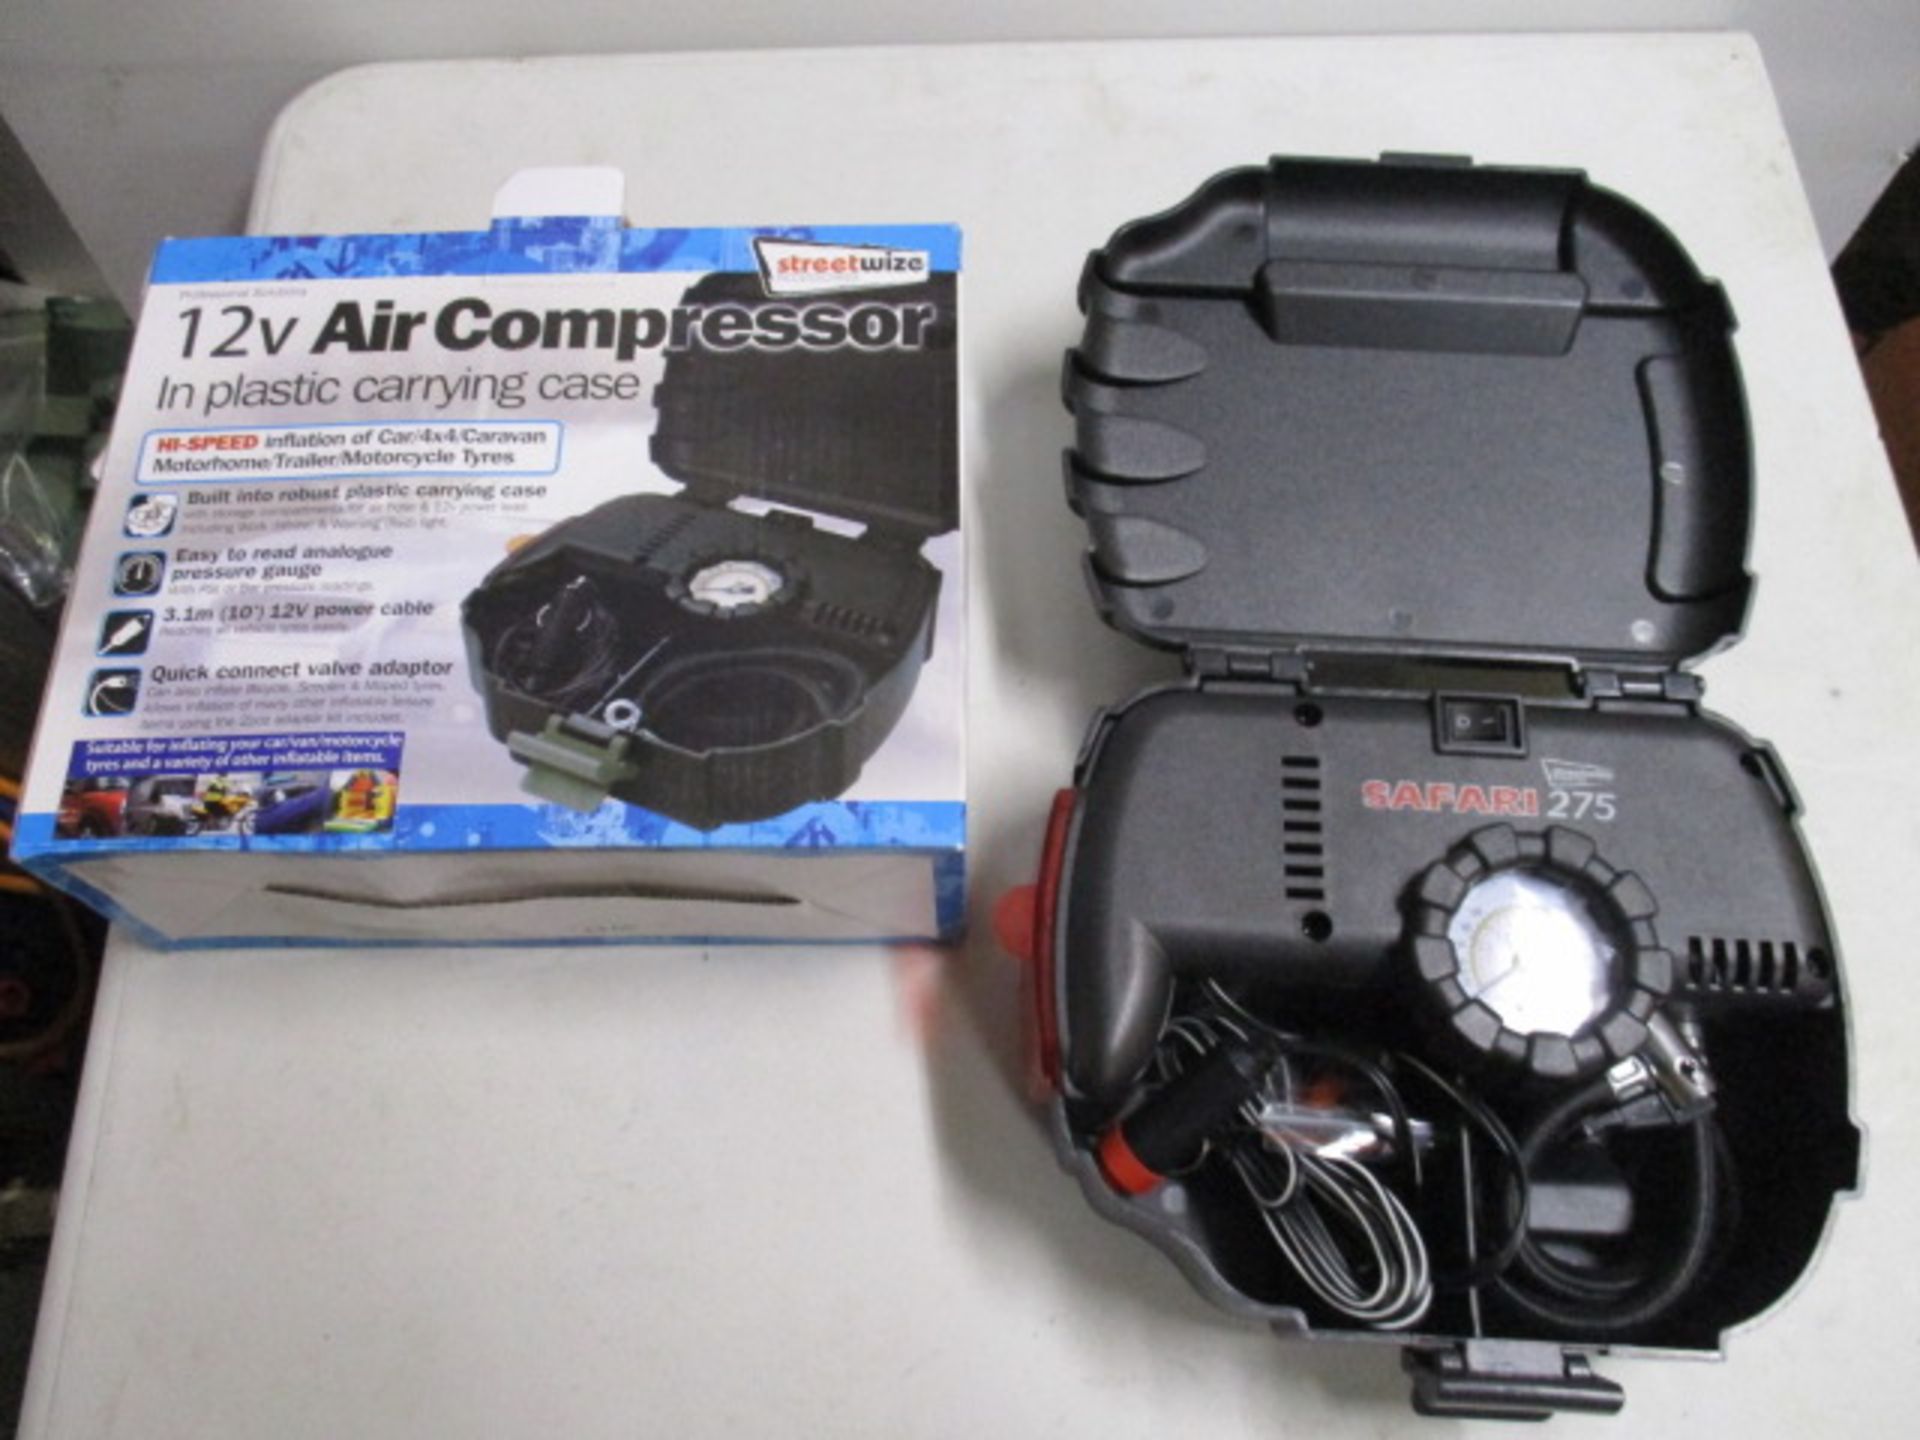 New Streetwize 12V air compressor in plastic carry case Model: Safari 275 Hi Speed inflation of